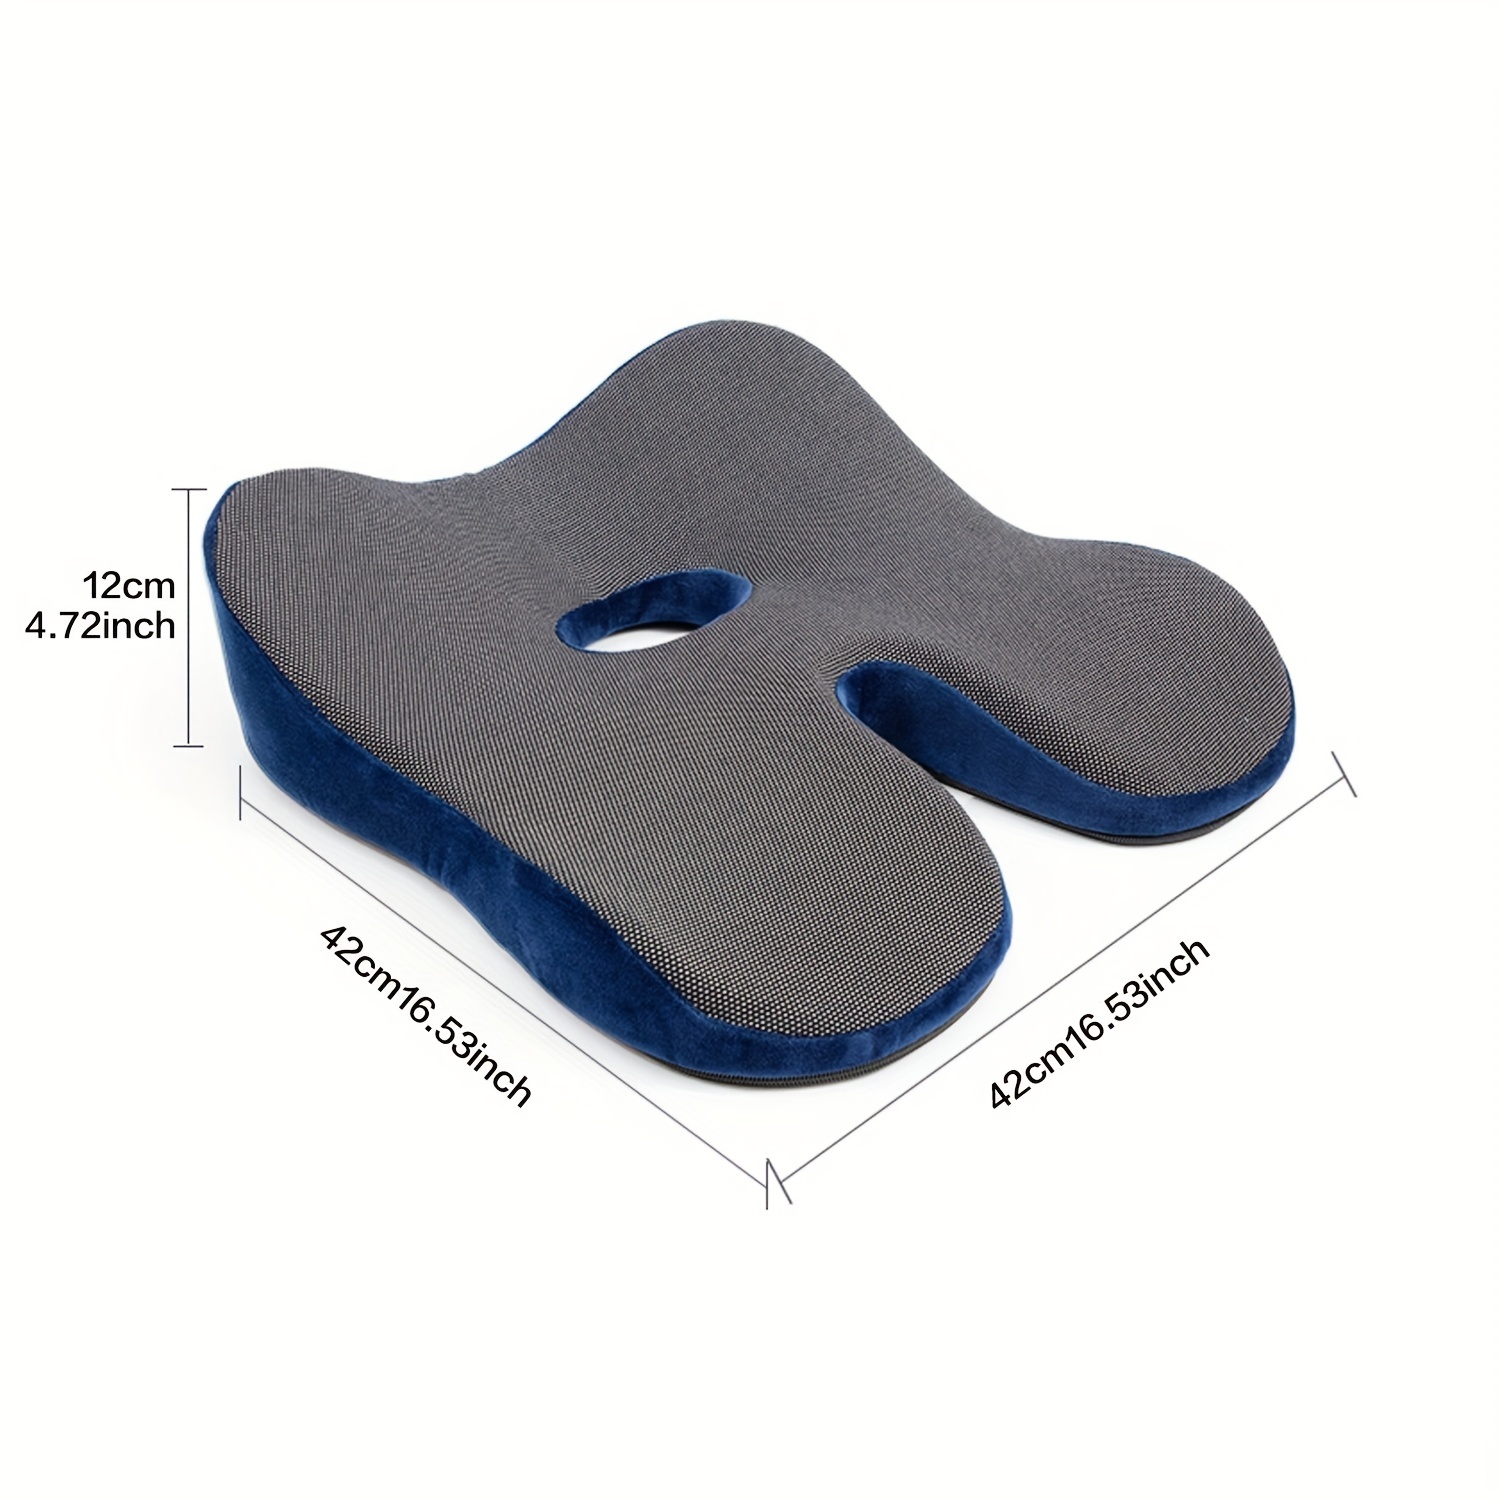 1pc Seat Cushion For Desk Chair,Donut Pillow,Pressure Relief Seat Cushion,Memory  Foam Seat Cushion